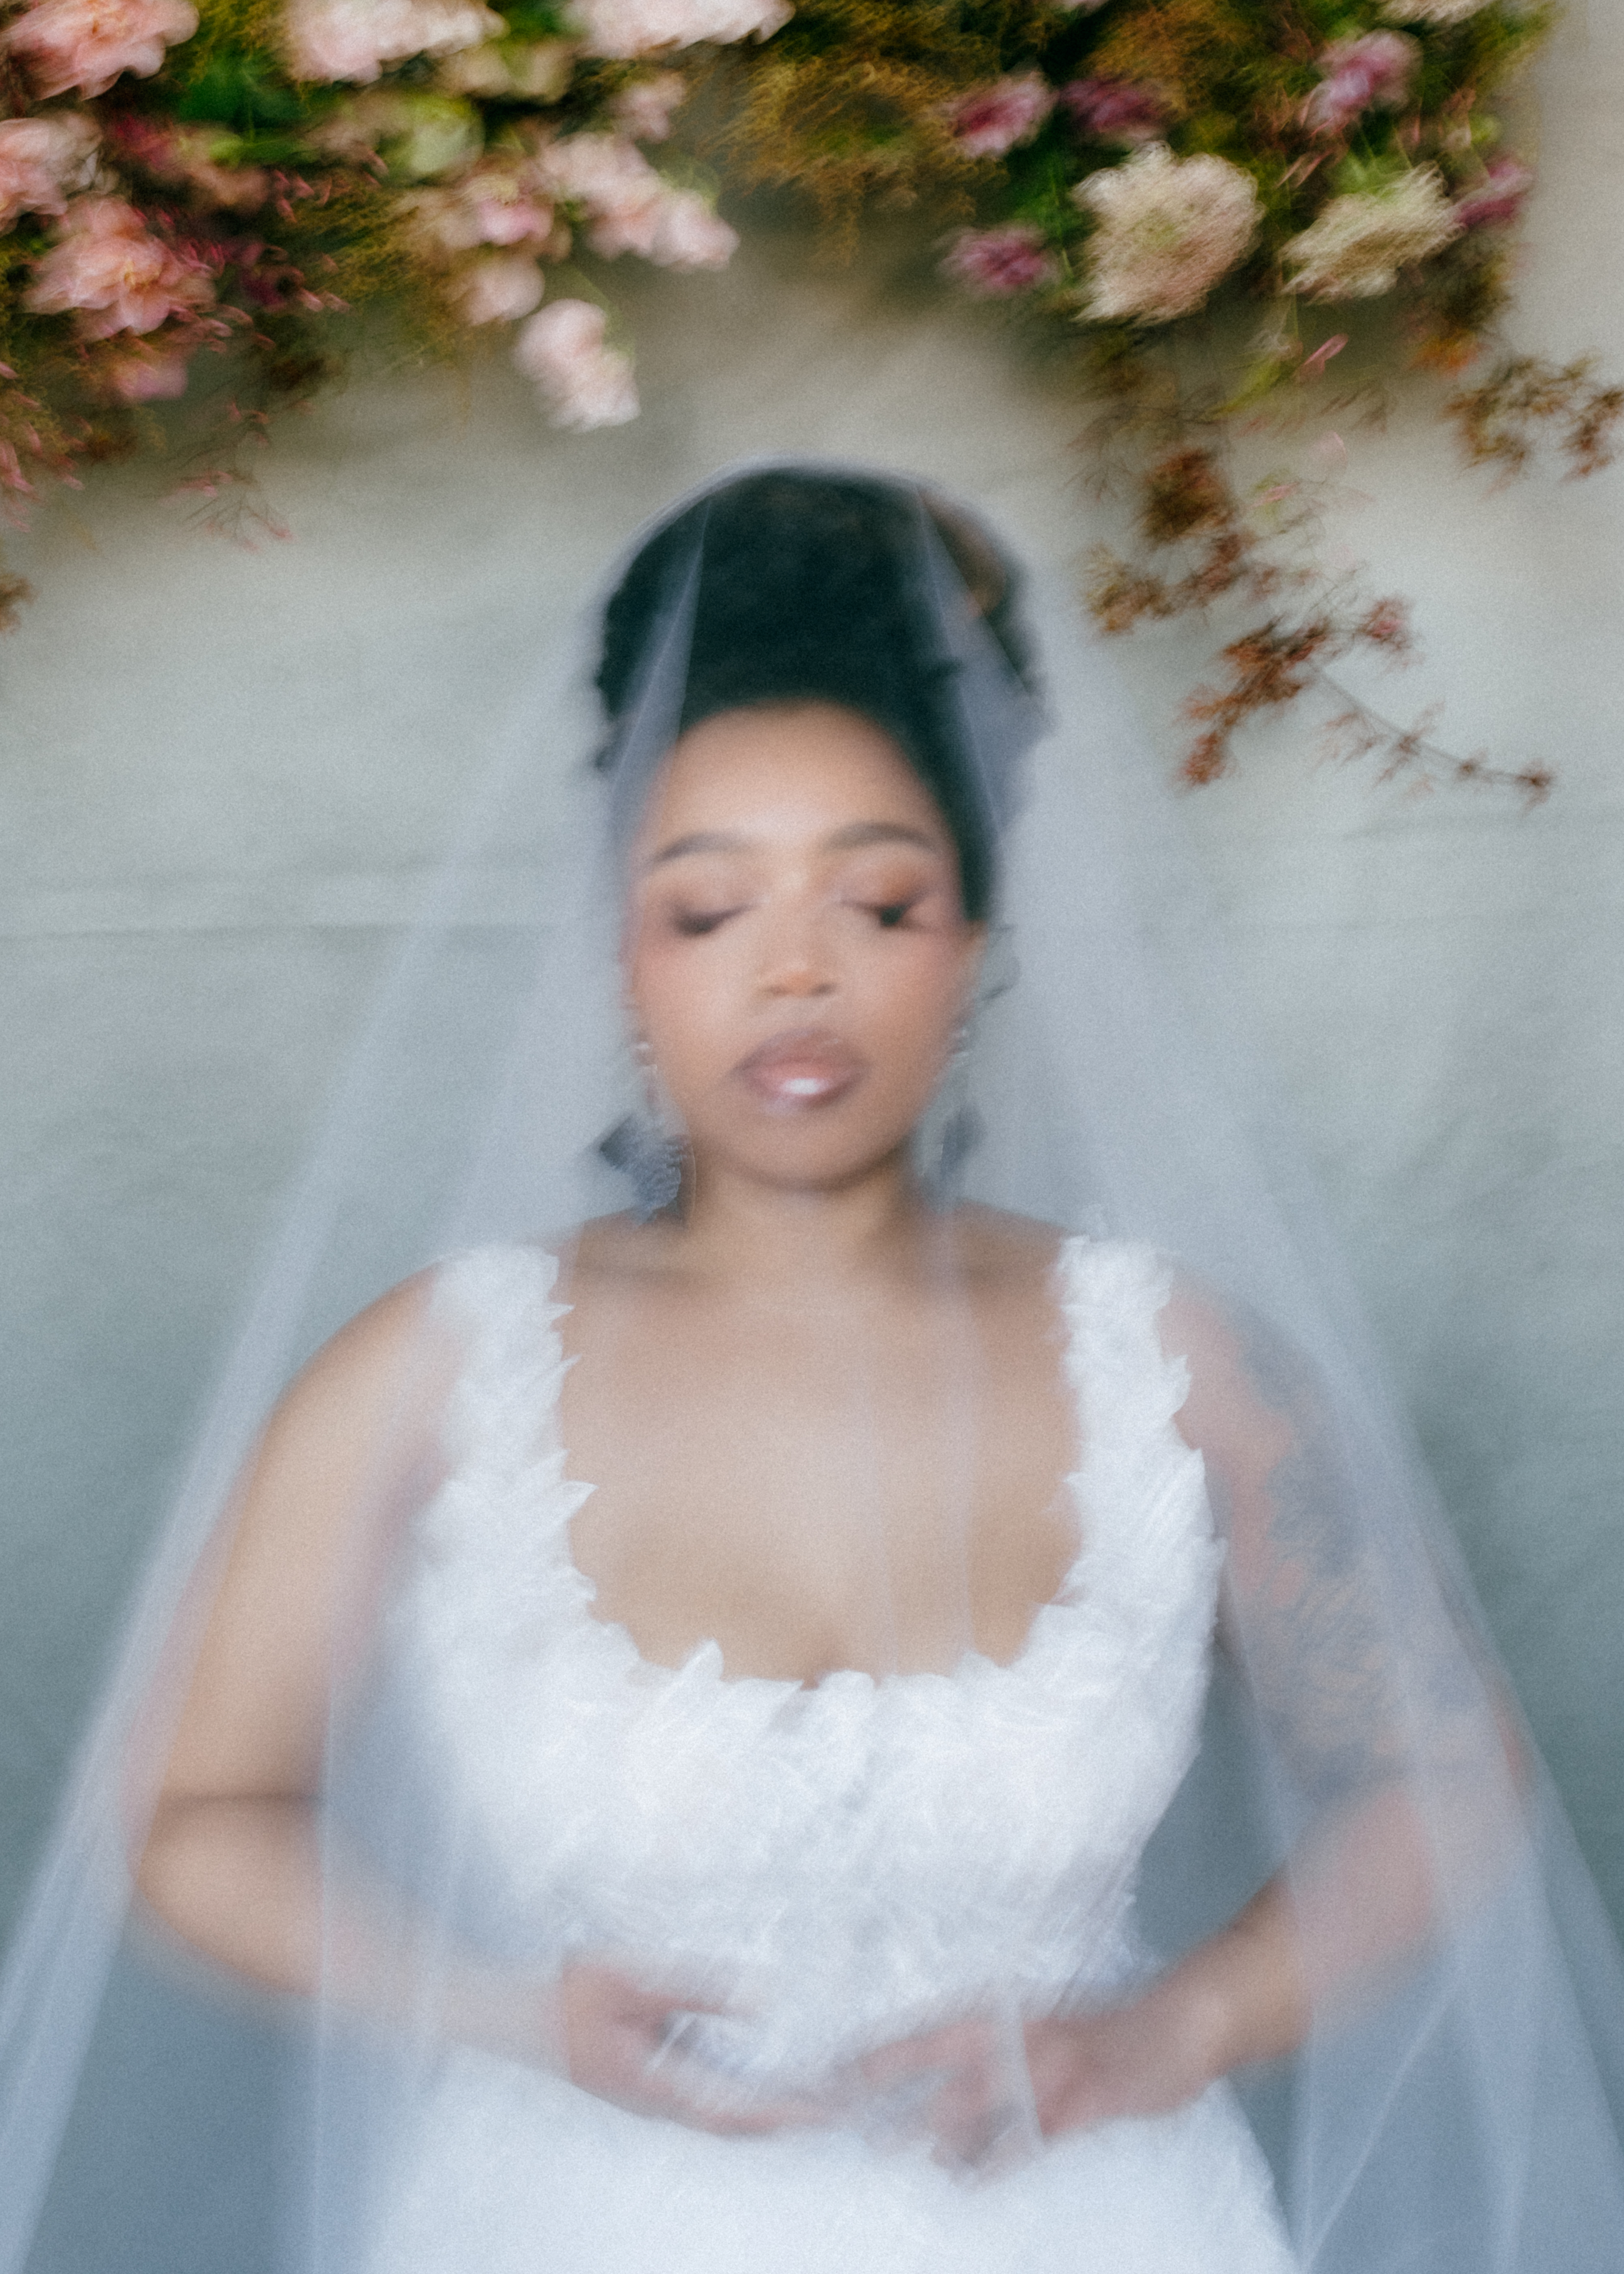 Ethereal Bridal Editorial with the Coolest Wedding Earrings